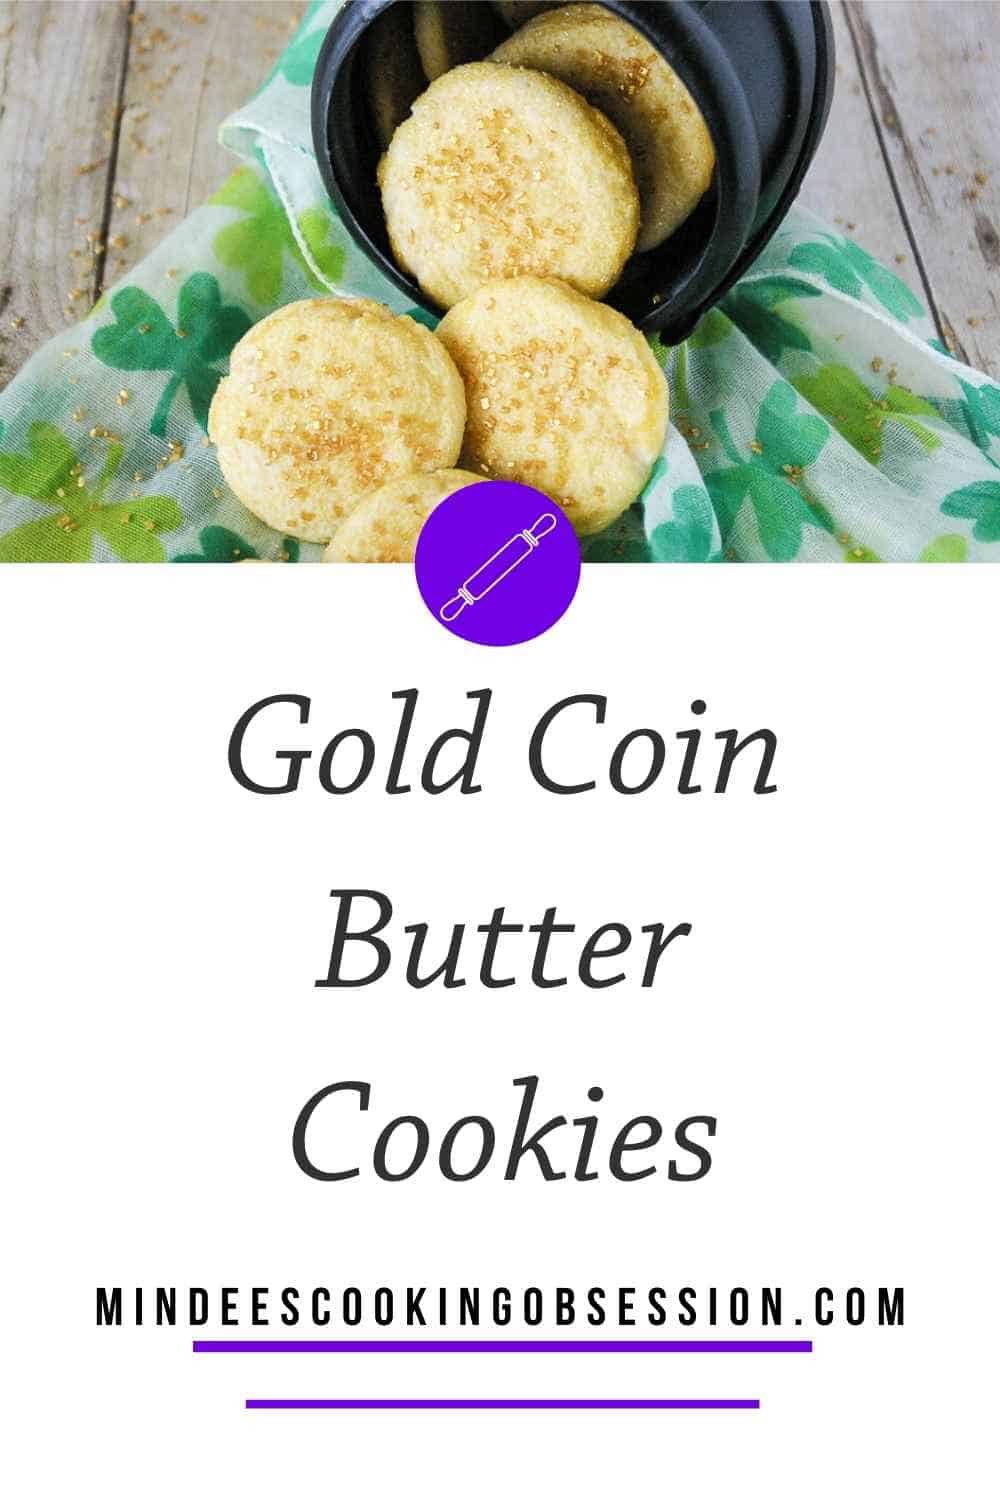 Gold Coin Butter Cookies - Mindee's Cooking Obsession